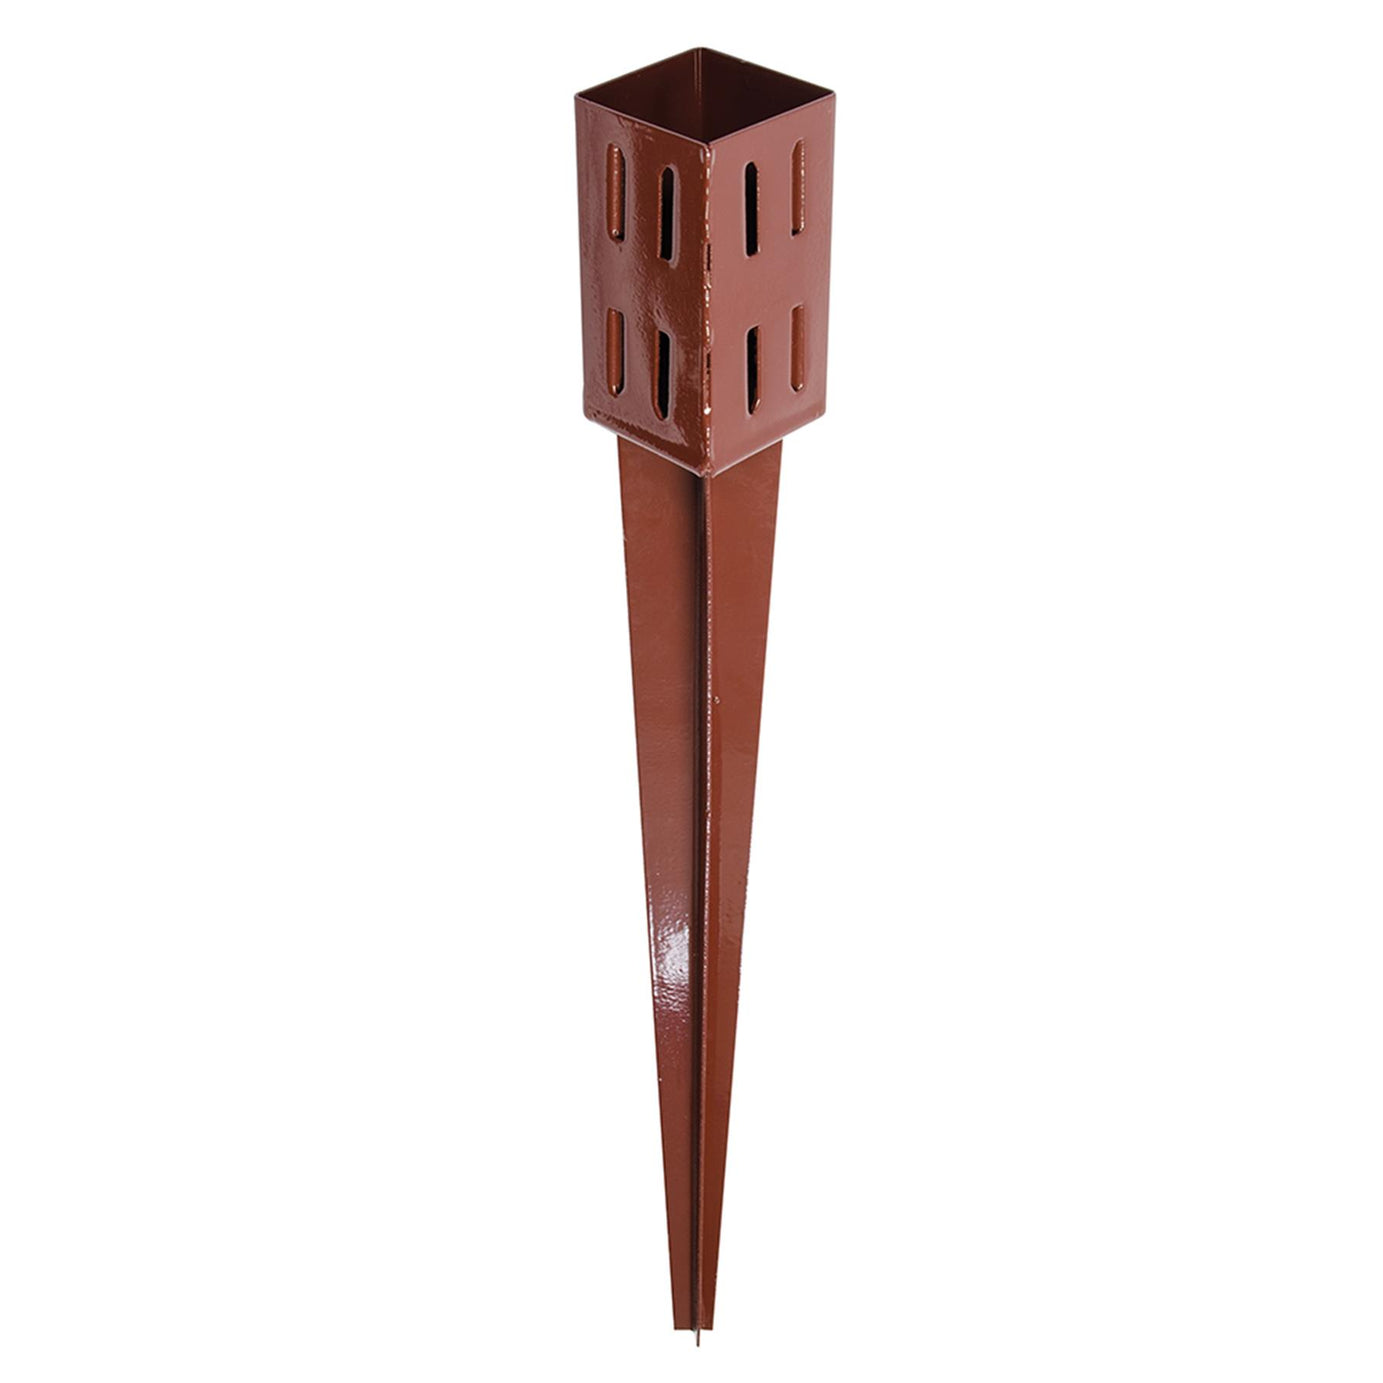 Easy-Grip Post Spike 75 X 75 X 750mm - 4 finned spike for securing fence posts